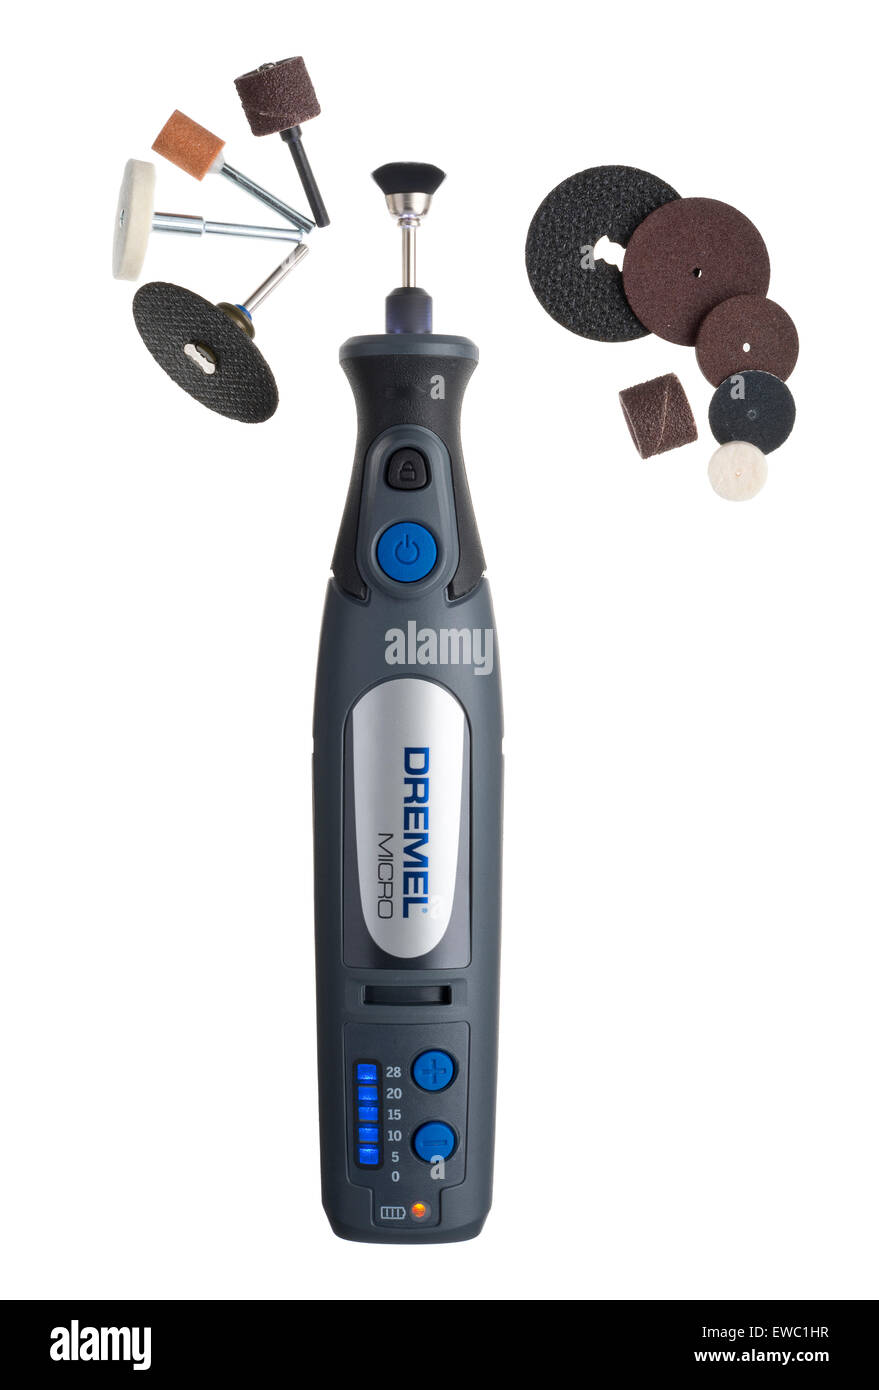 Dremel Micro tool for sanding, grinding, polishing, buffing and scouring. Stock Photo